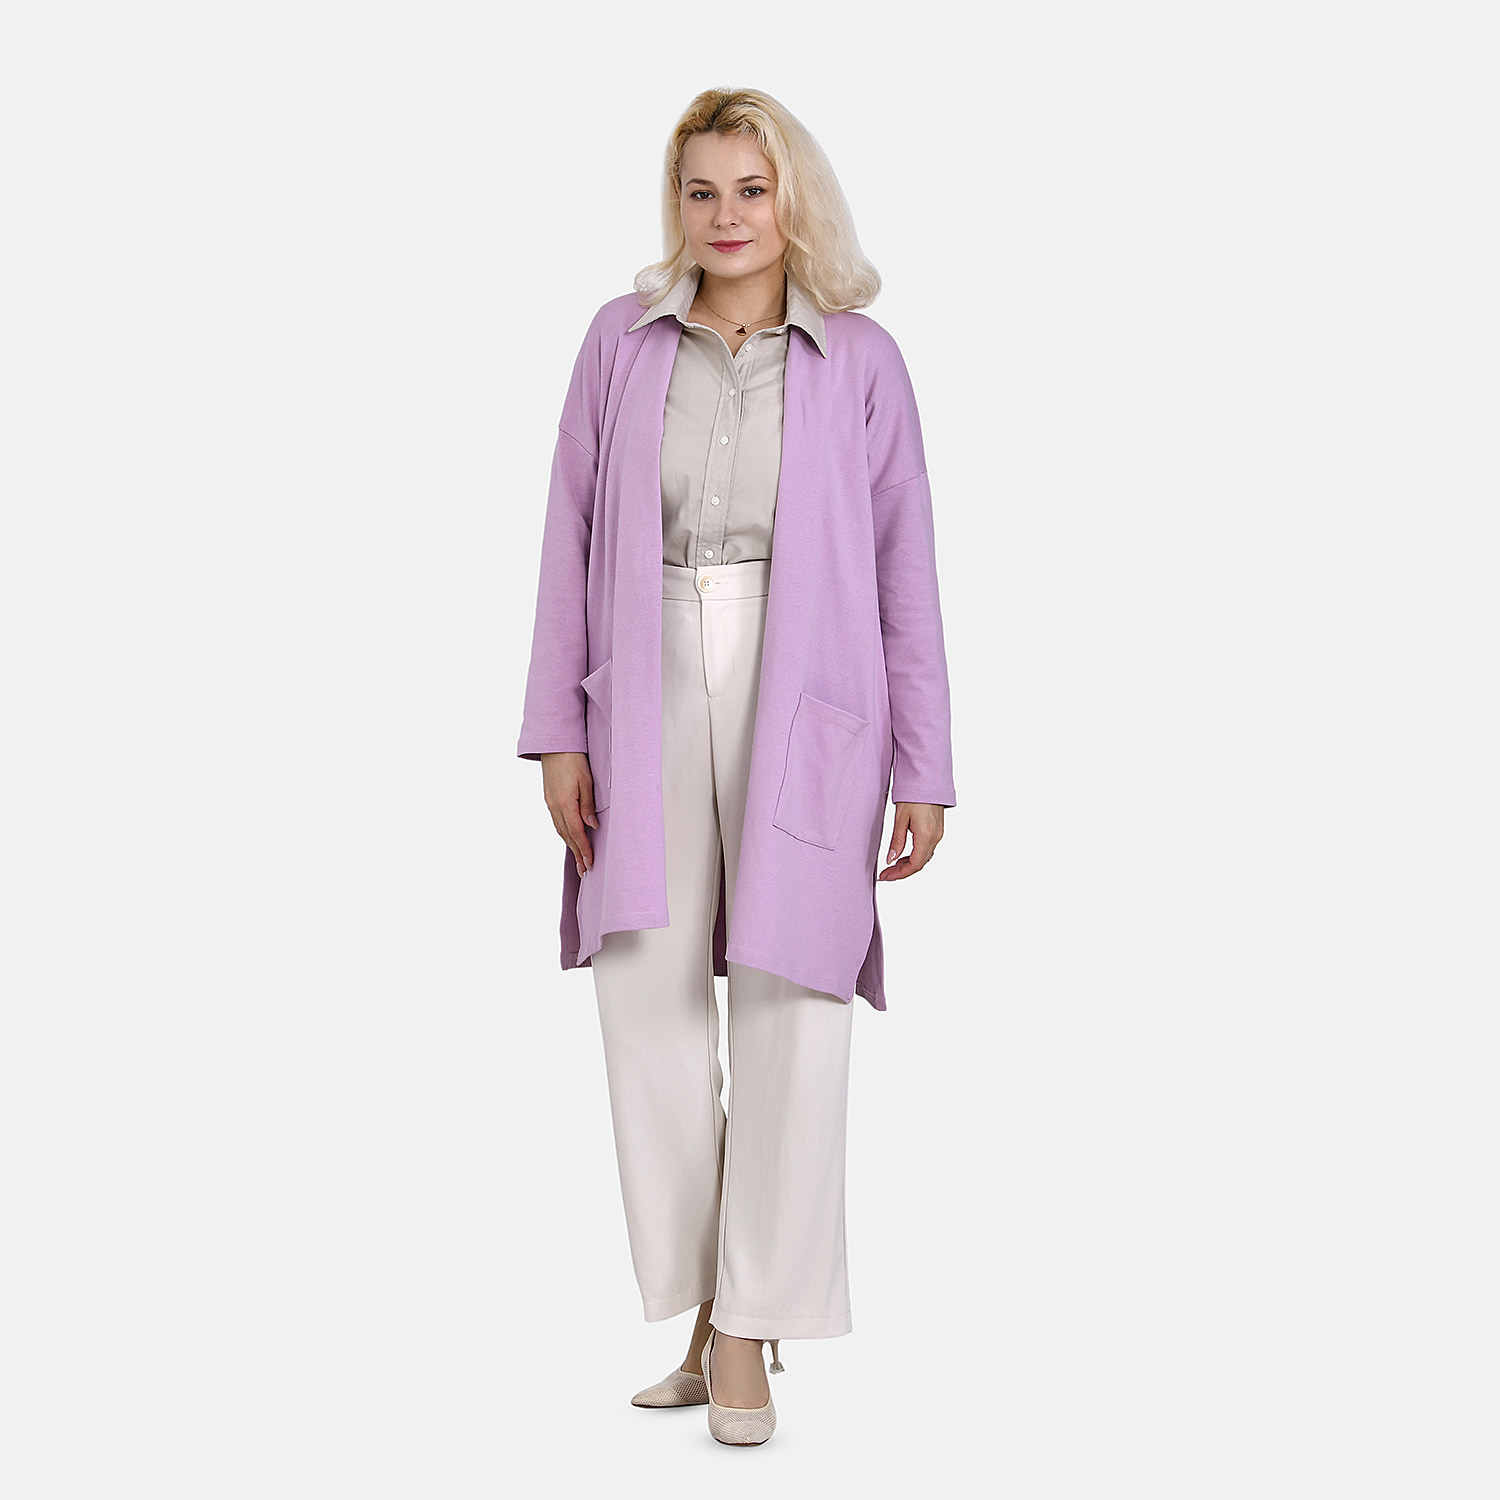 Tamsy 60% Cotton Blend Jersey Cardigan (One Size, 8-20) - Purple